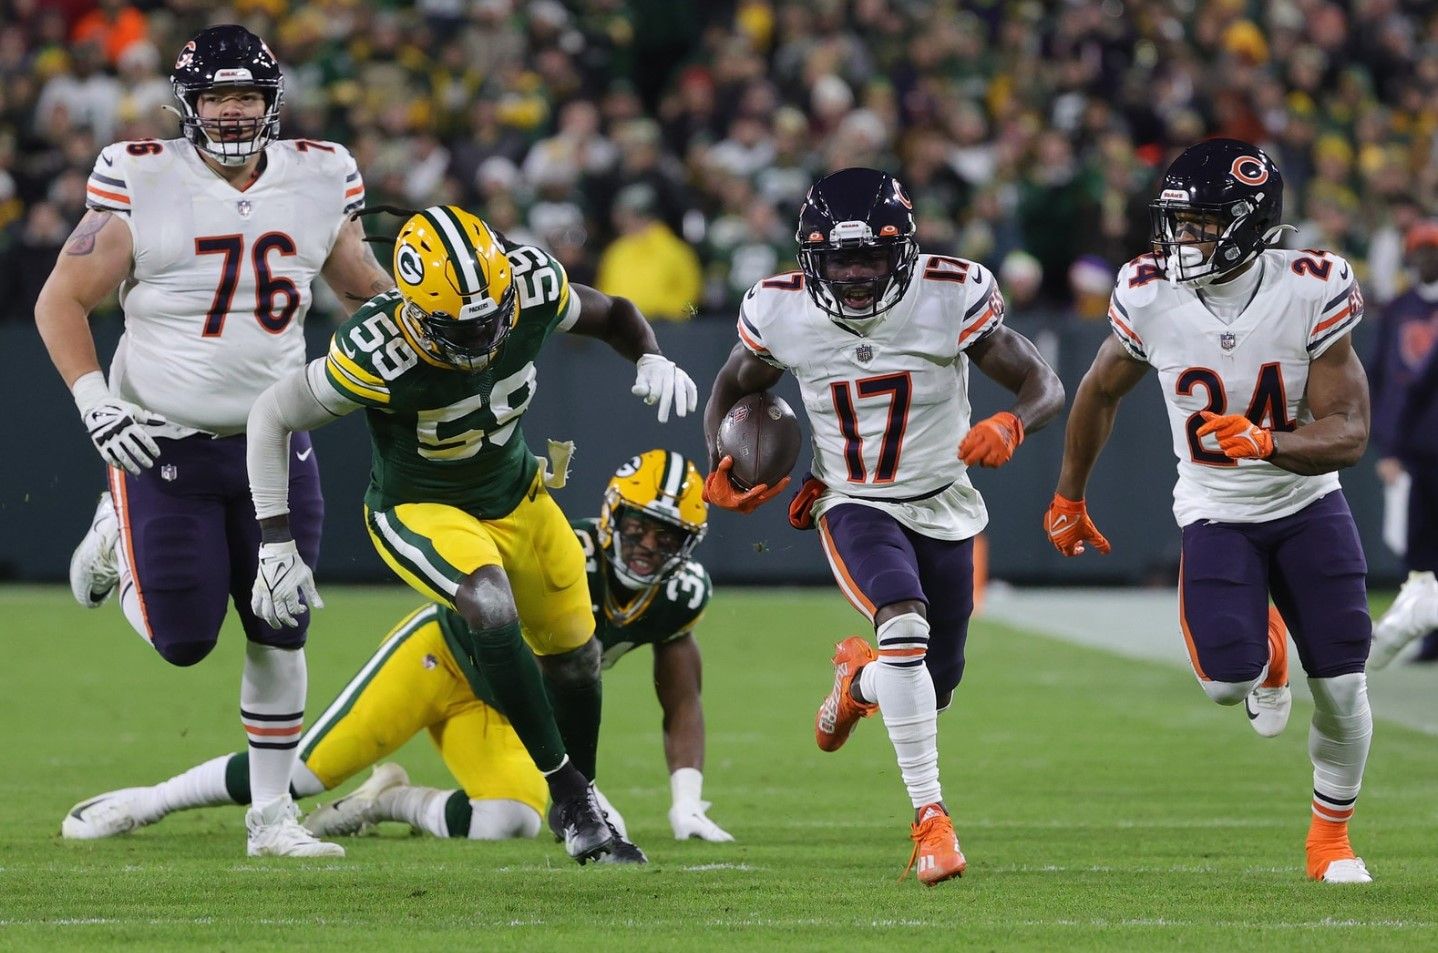 Bears can't keep up after strong first half, lose to Packers 45-30